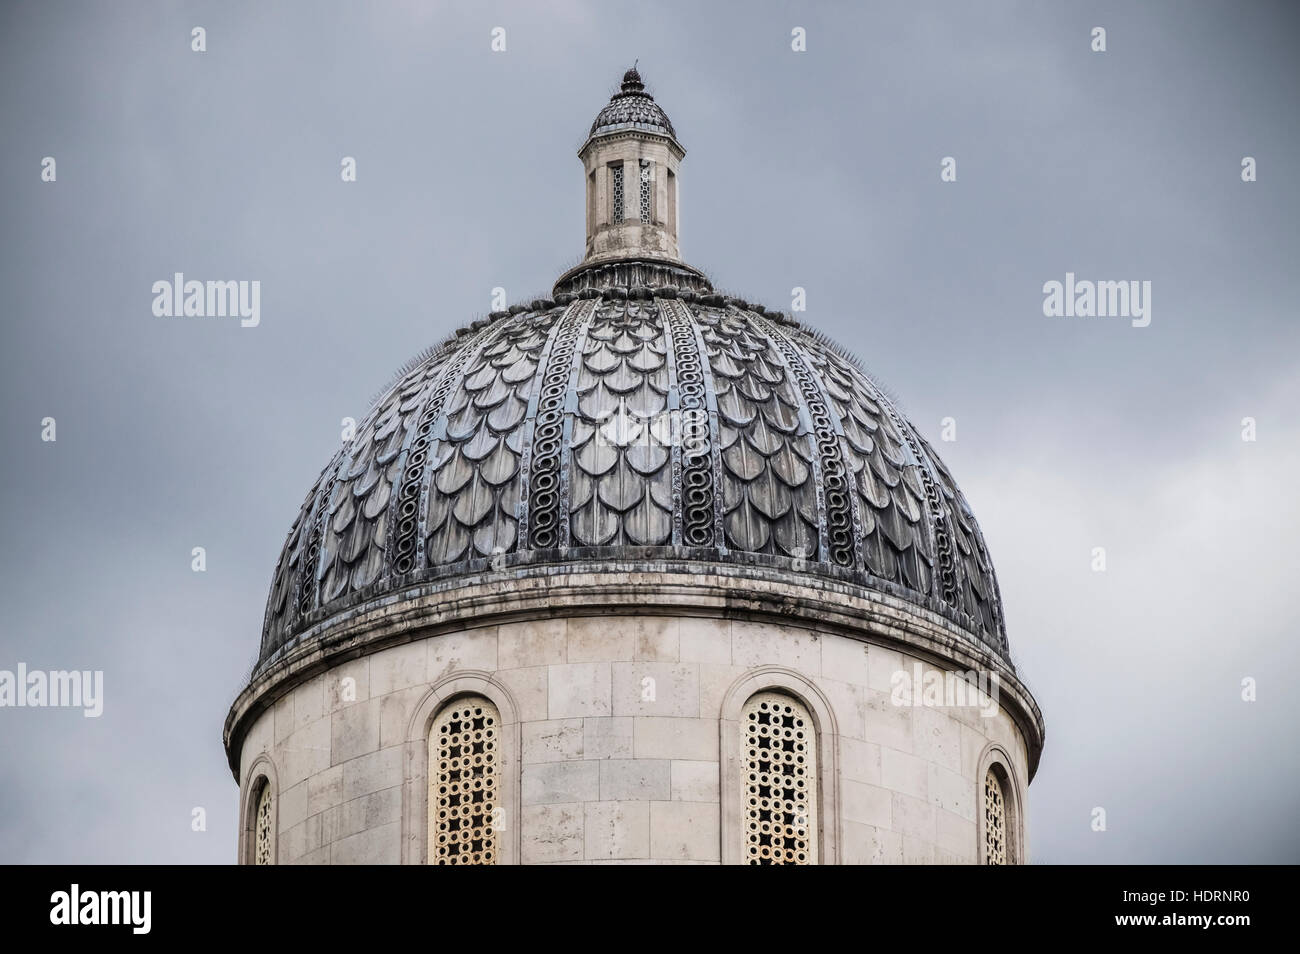 The dome of The National Gallery against a stormy London sky; London, England Stock Photo